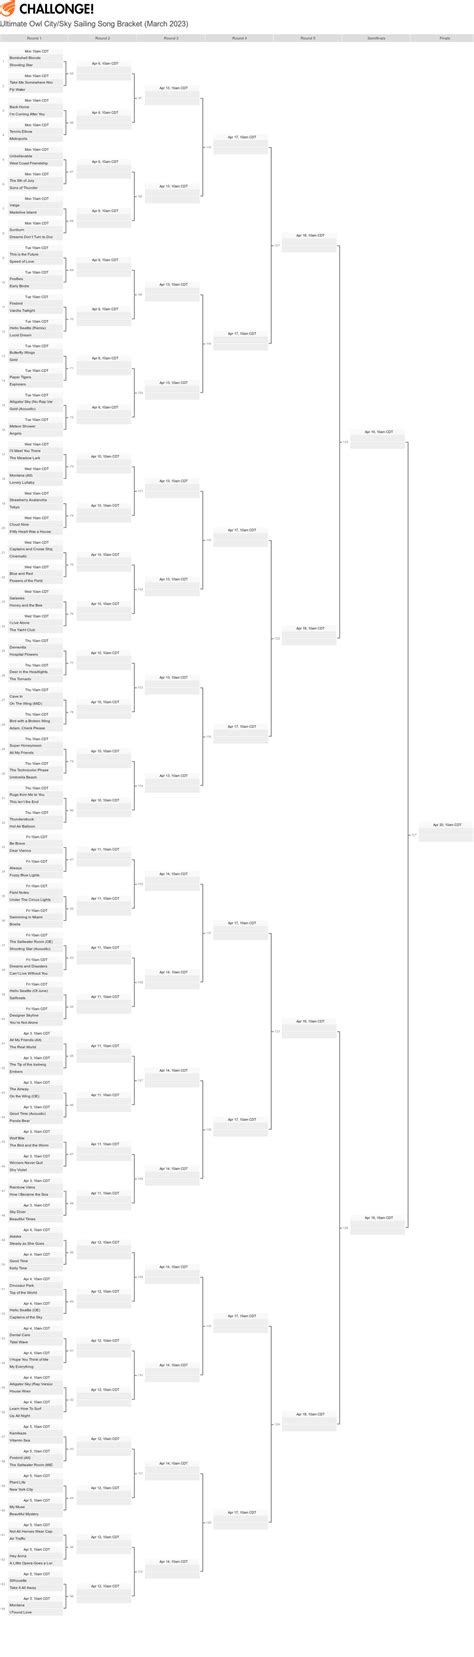 The Ultimate Owl City/Sky Sailing Song Bracket starts tomorrow! Feel free to make your ...